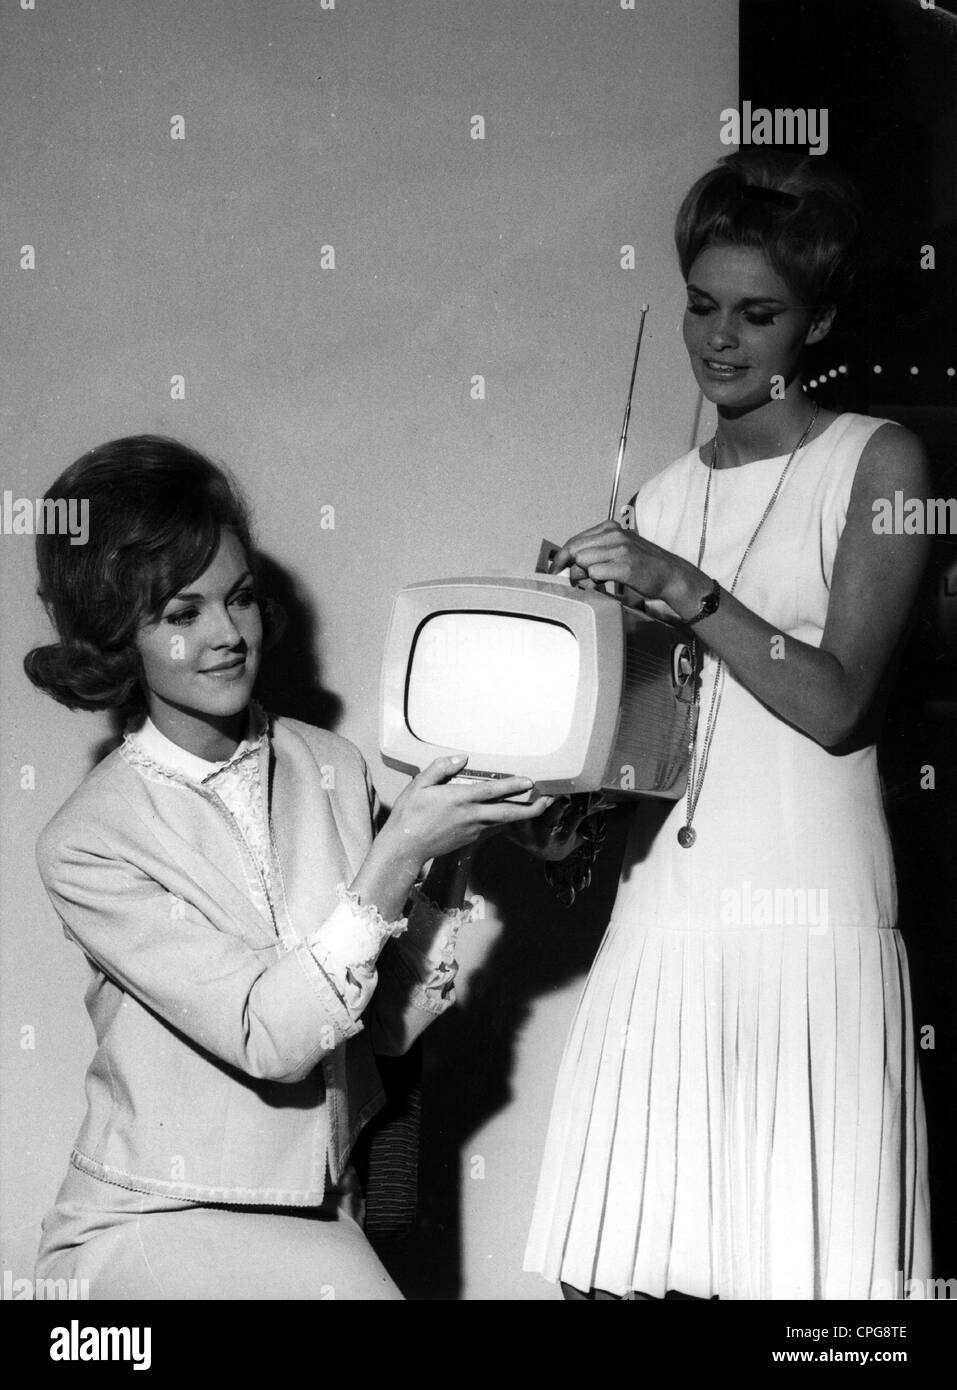 Broadcast, televisione, televisione portatile, due donne presentano il dispositivo, 1962, Additional-Rights-Clearences-Not Available Foto Stock